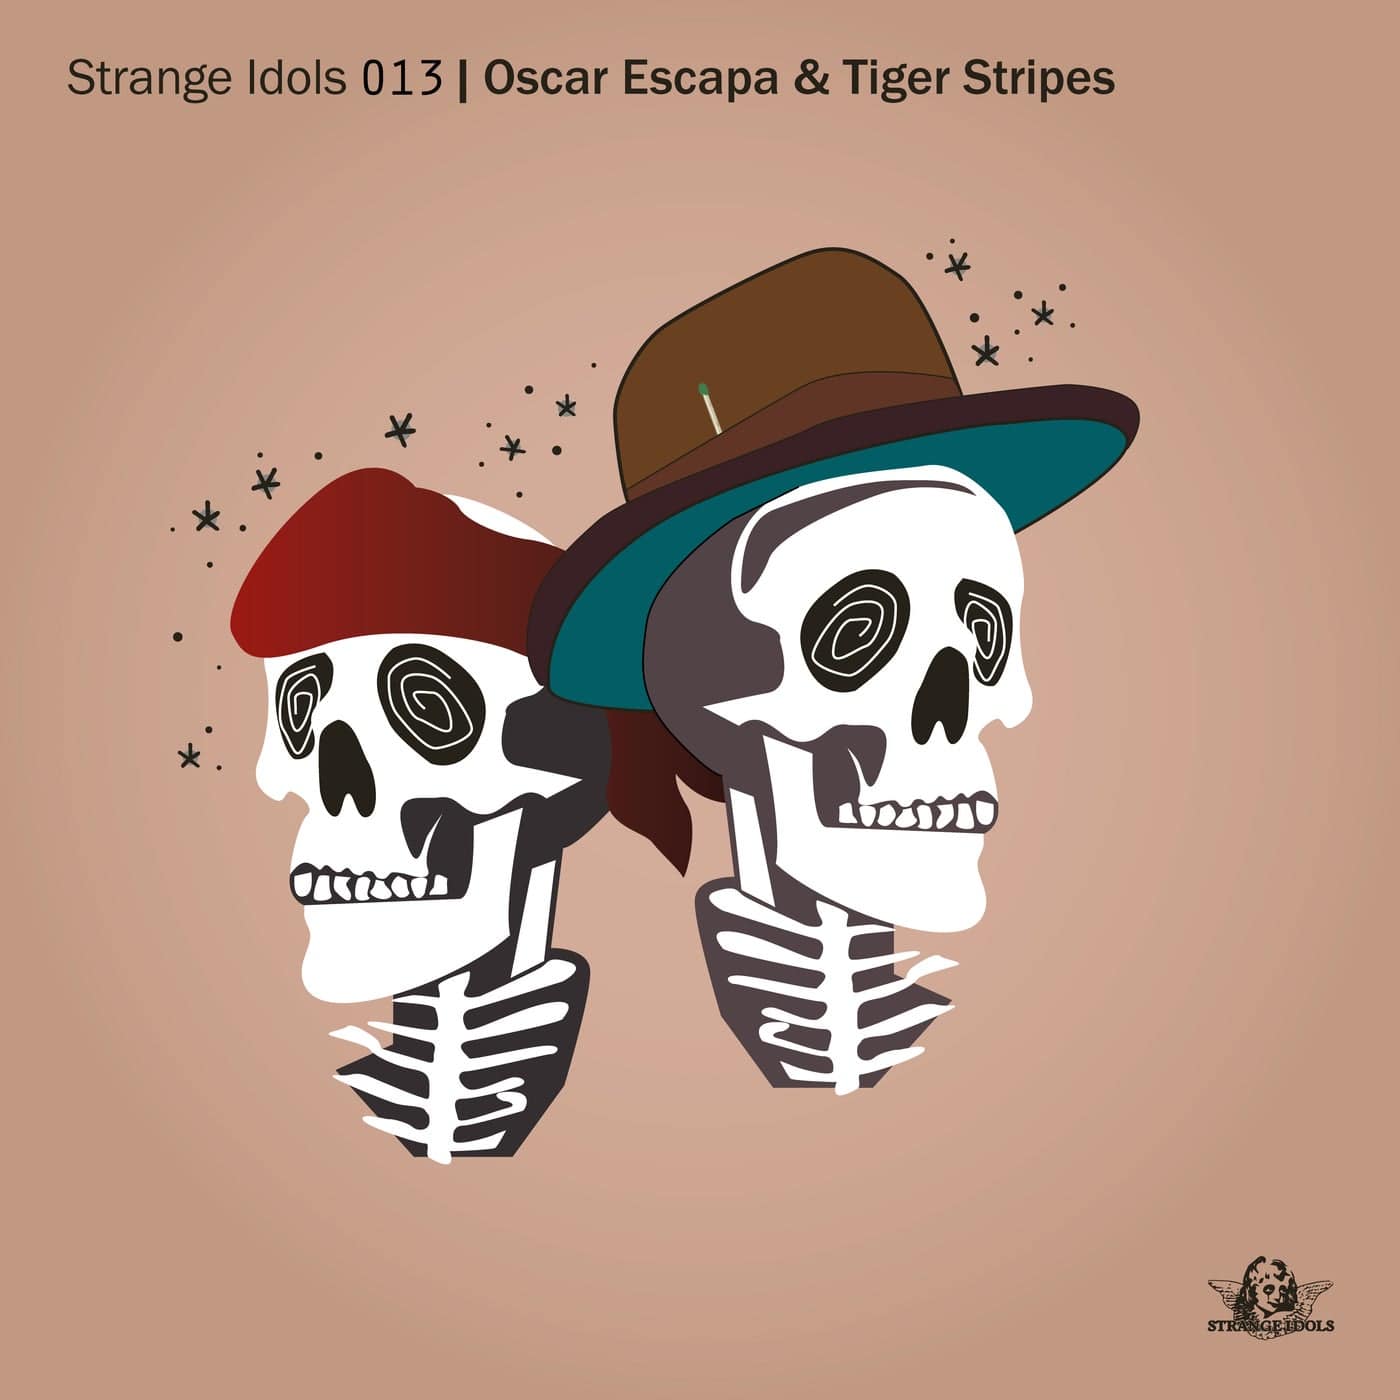 Release Cover: Tiger Stripes, Oscar Escapa - Trance Like State EP on Electrobuzz